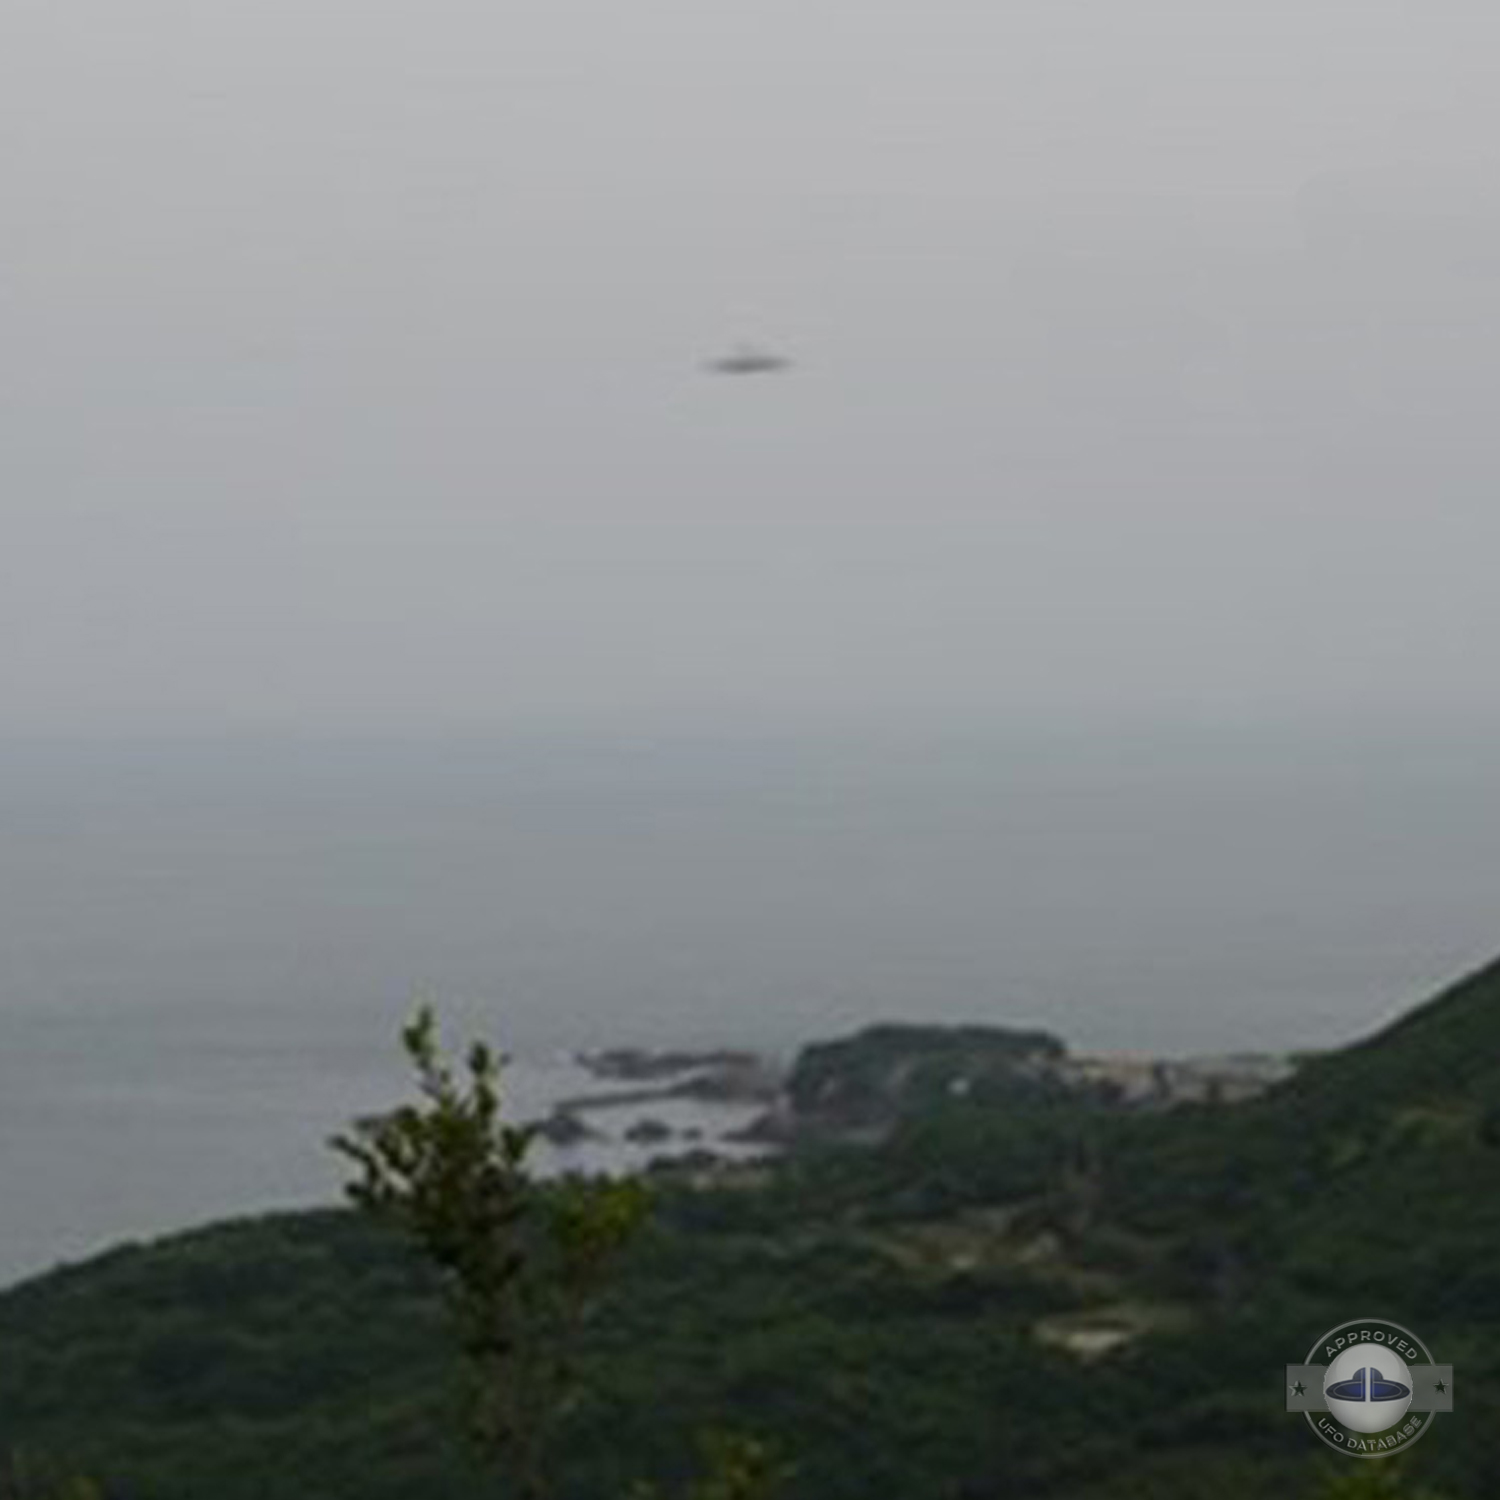 Ise Shima National Park UFO picture | Kansai, Japan | July 12 2009 UFO Picture #236-2